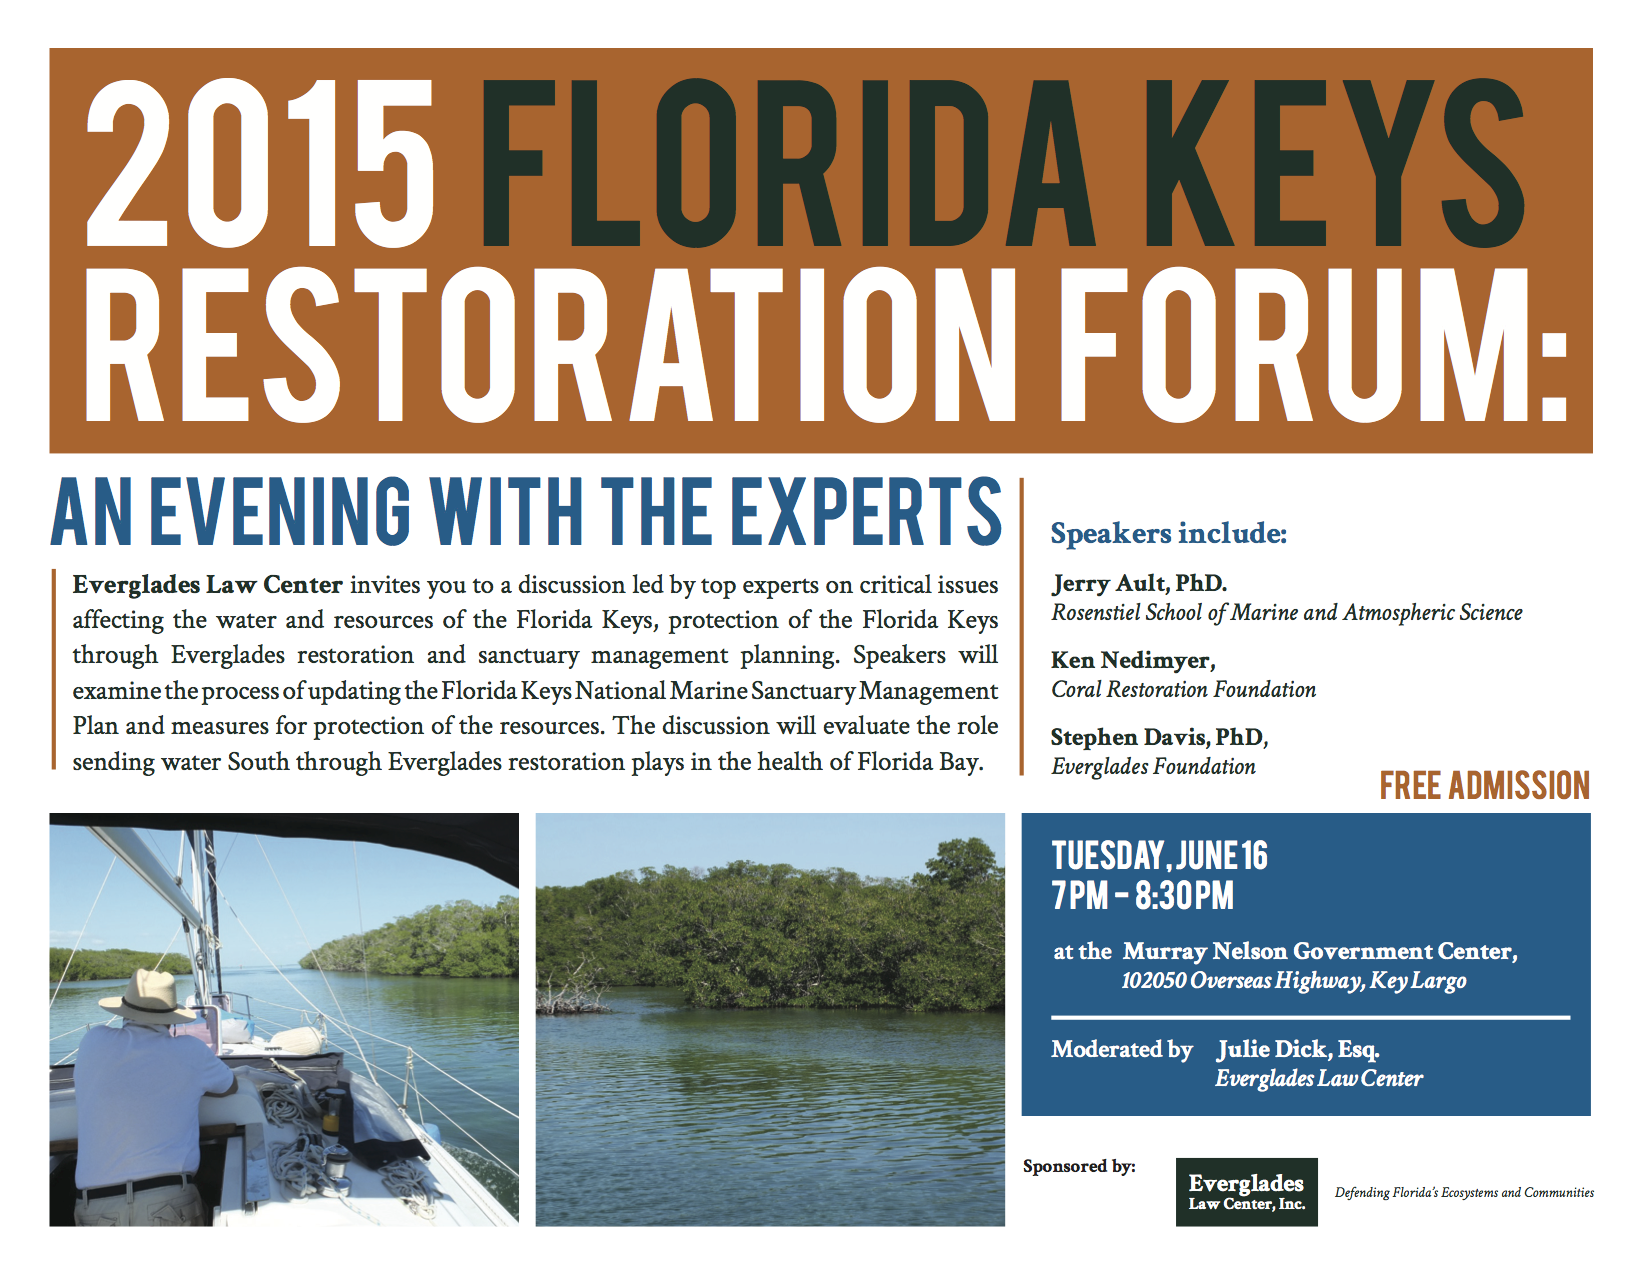 2015 Florida Keys Restoration Forum: An Evening With The Experts